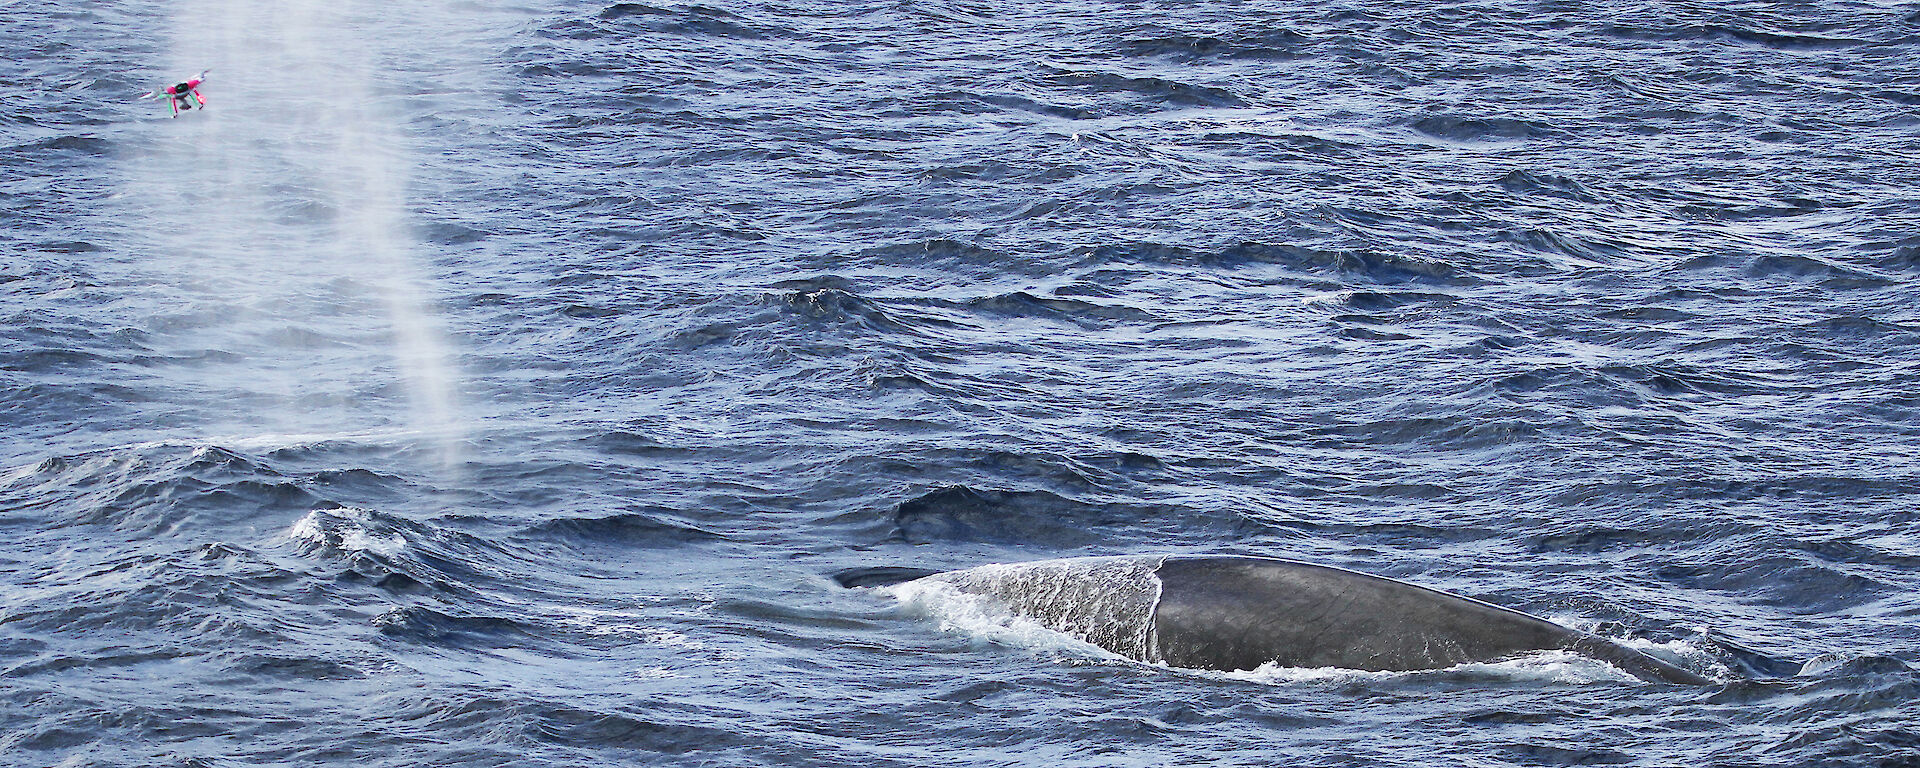 A small drone captures a sample from the blow of a blue whale during research in the Southern Ocean.